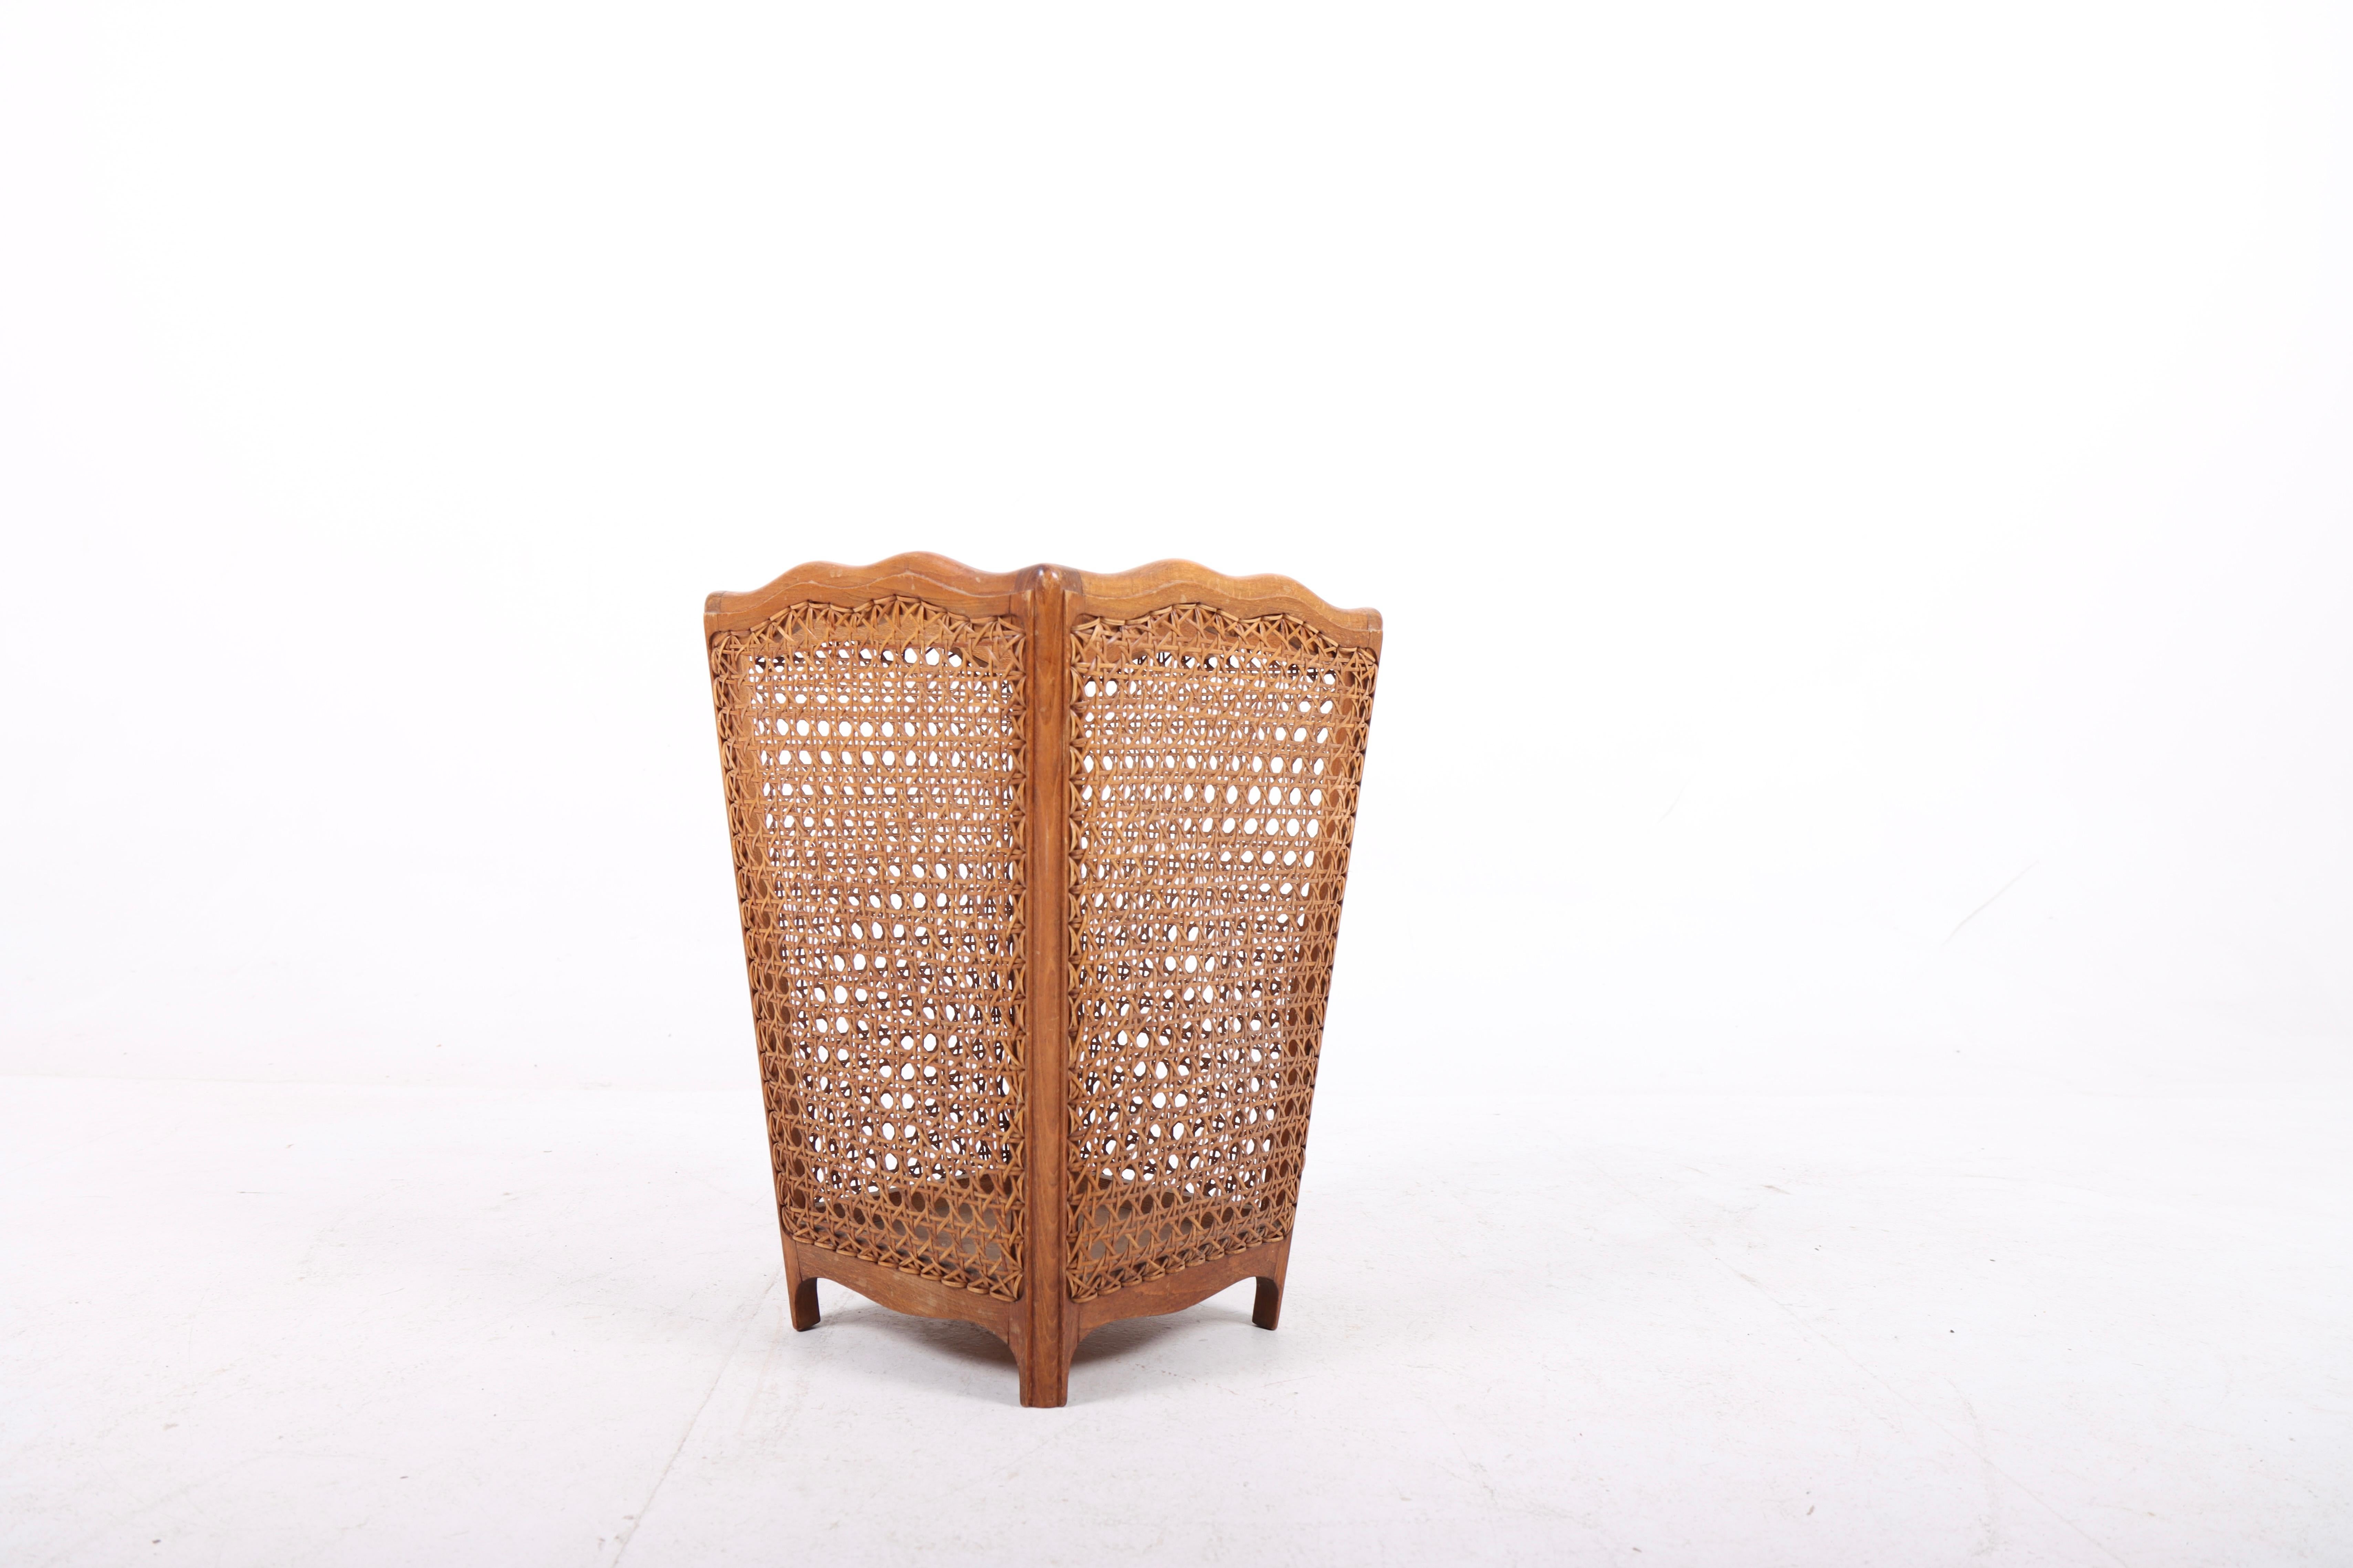 Danish Midcentury Waste Bin in Beech and Cane, Made in Denmark, 1950s For Sale